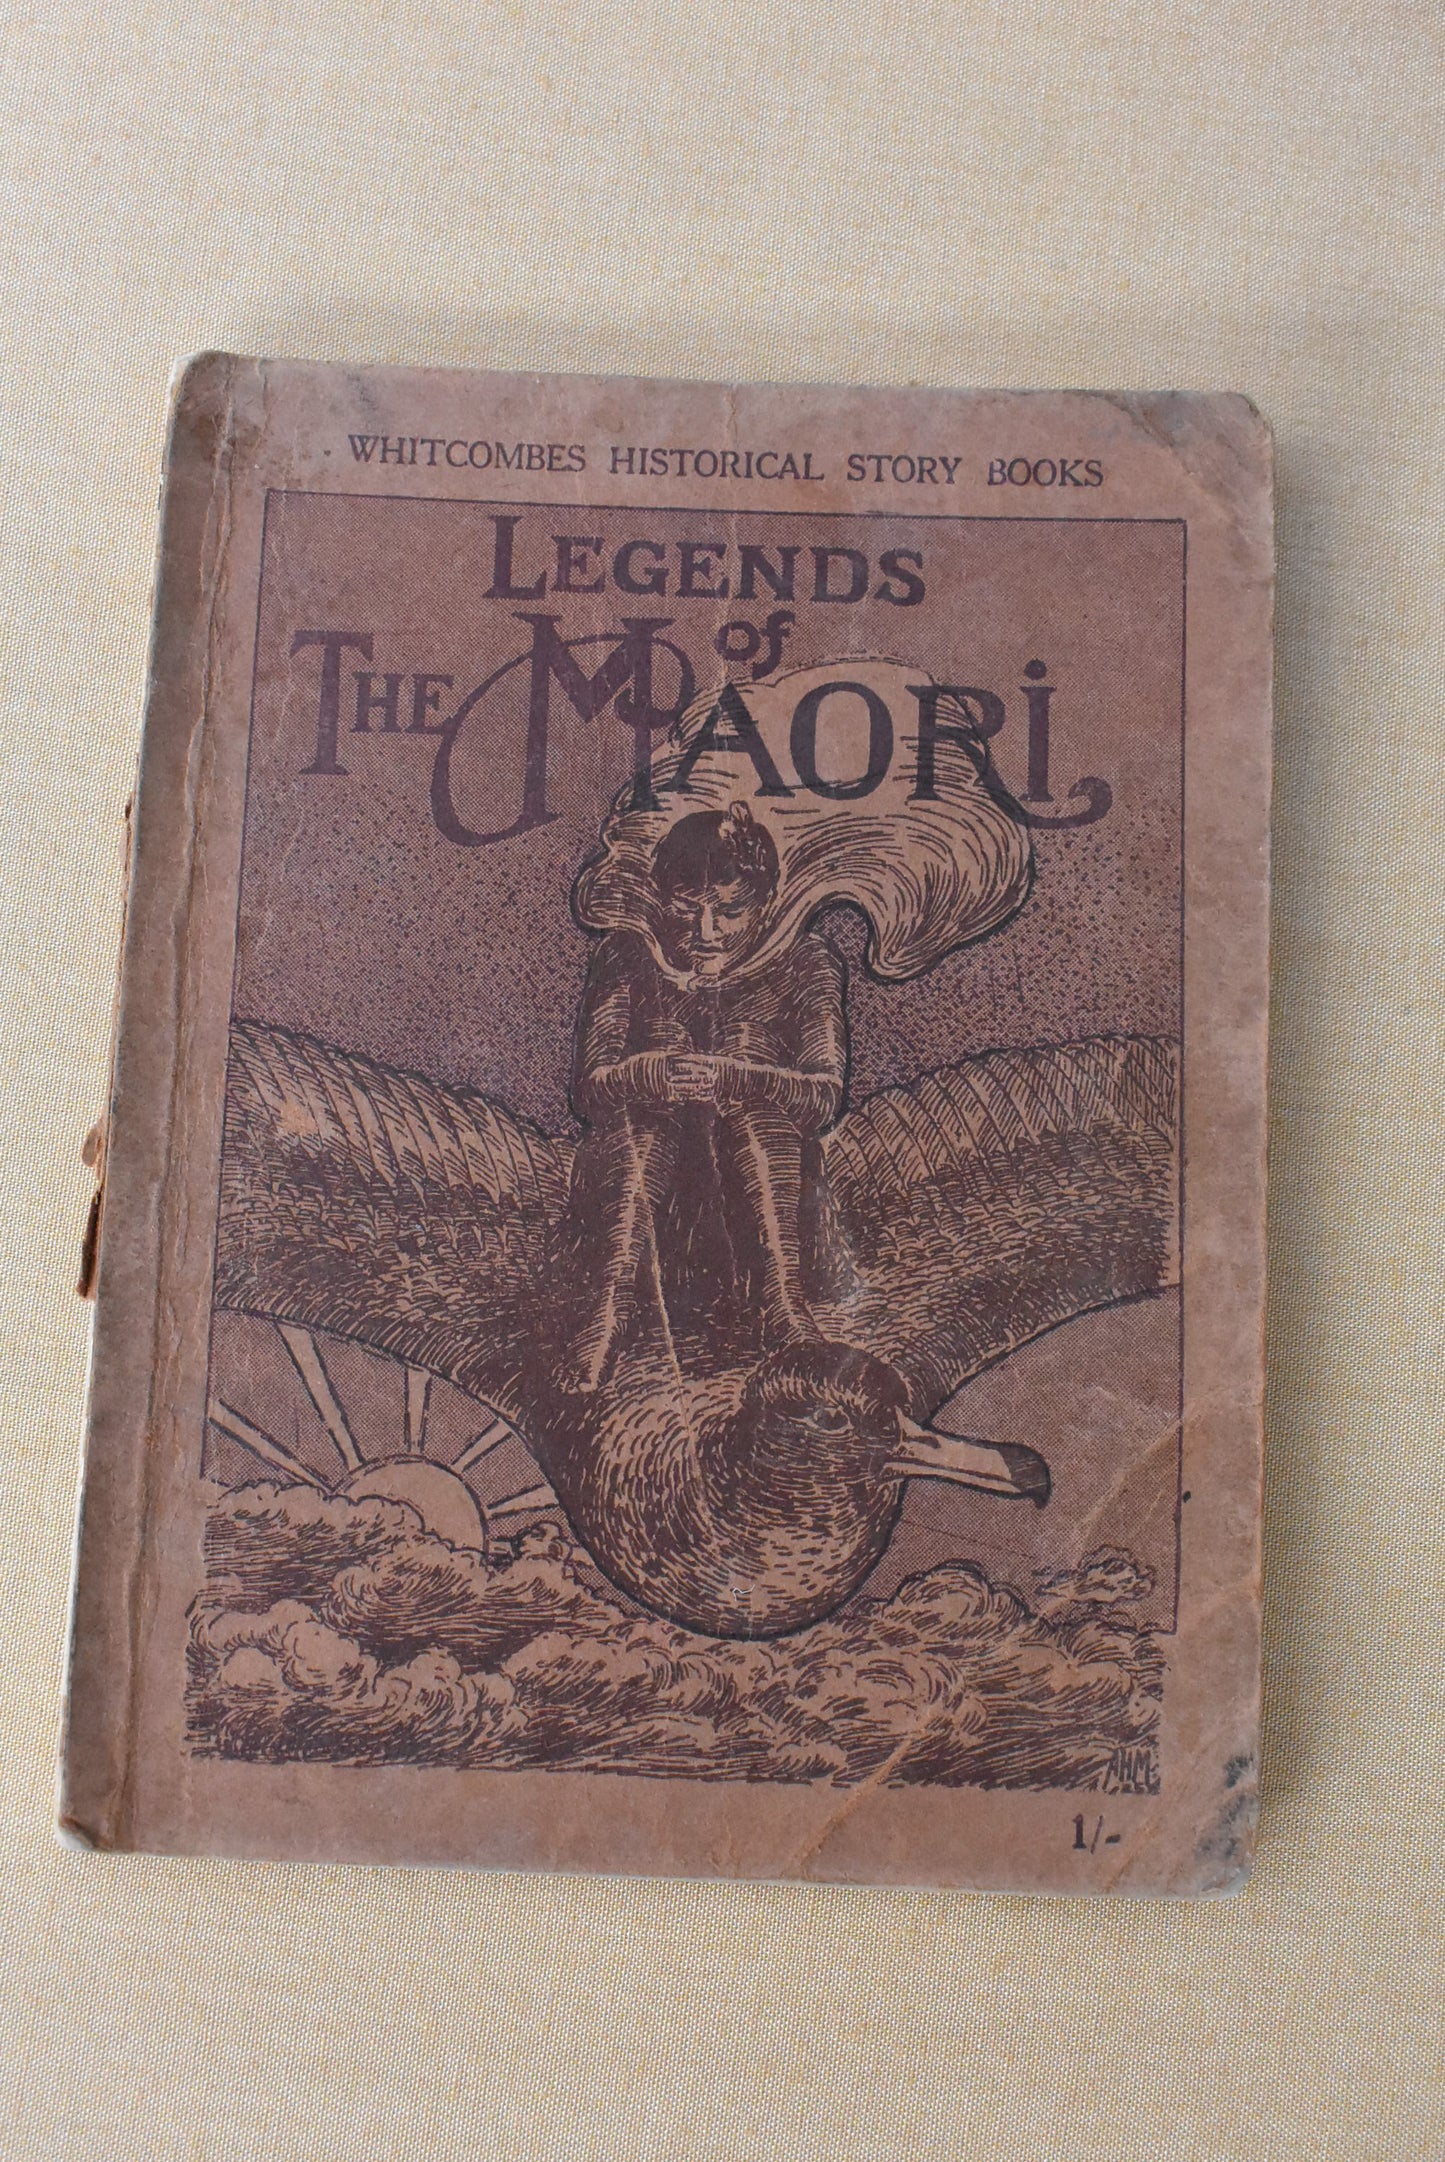 Vintage Whitcombes 'Legends of The Maori' book